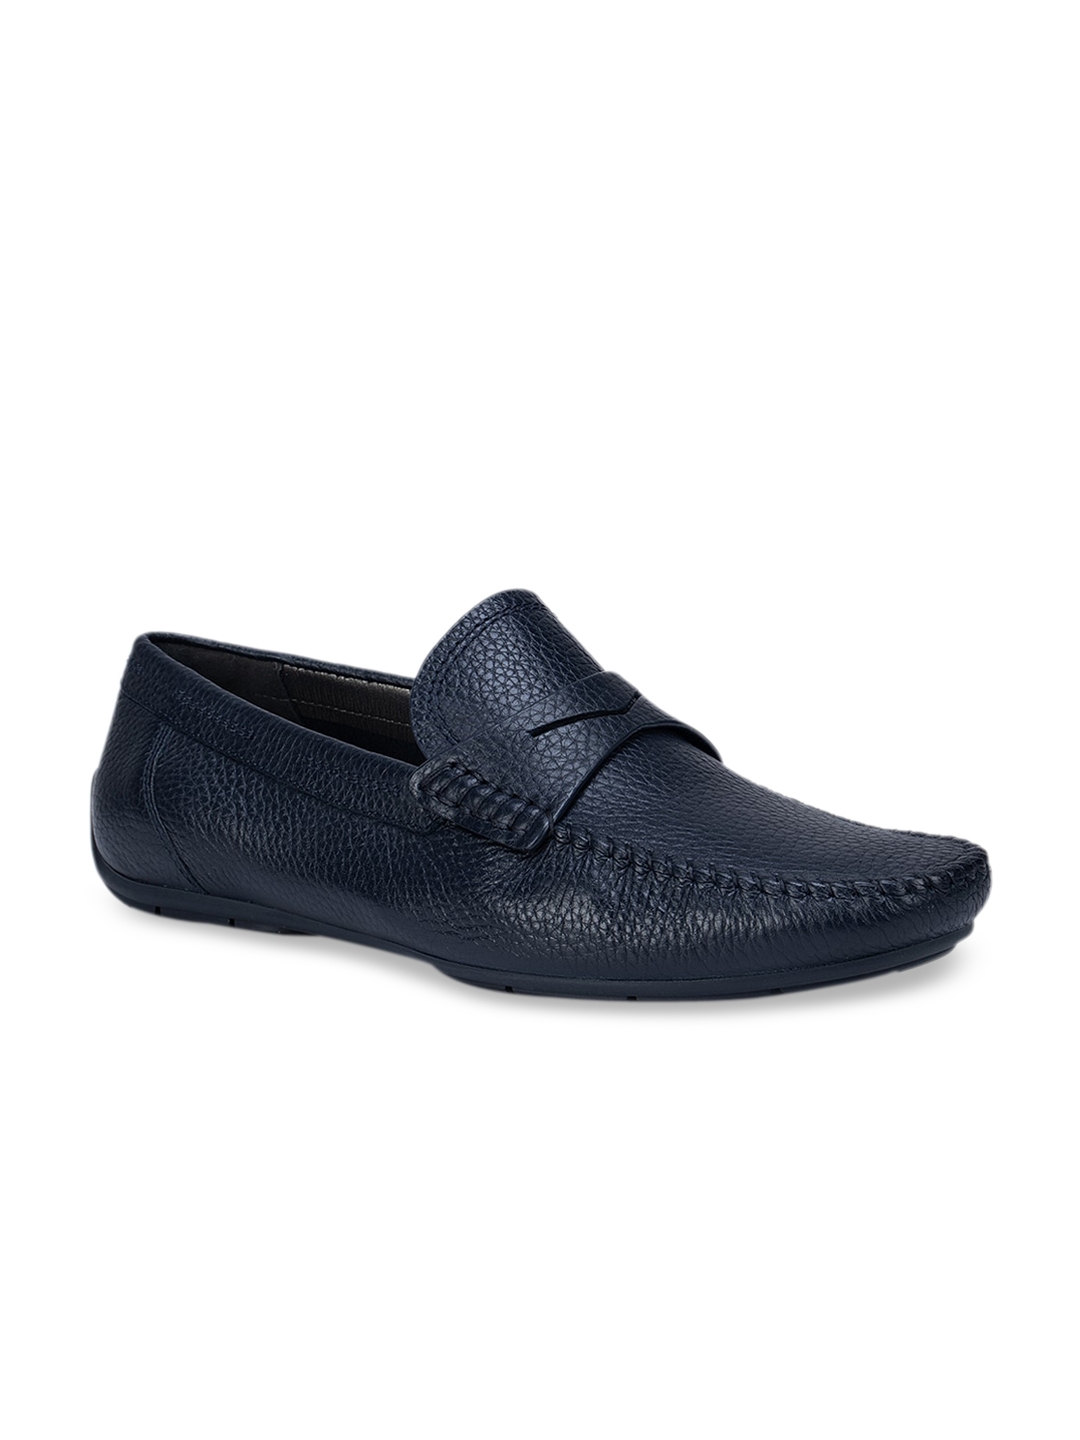 Buy ROSSO BRUNELLO Men Blue Leather Loafers - Casual Shoes for Men ...